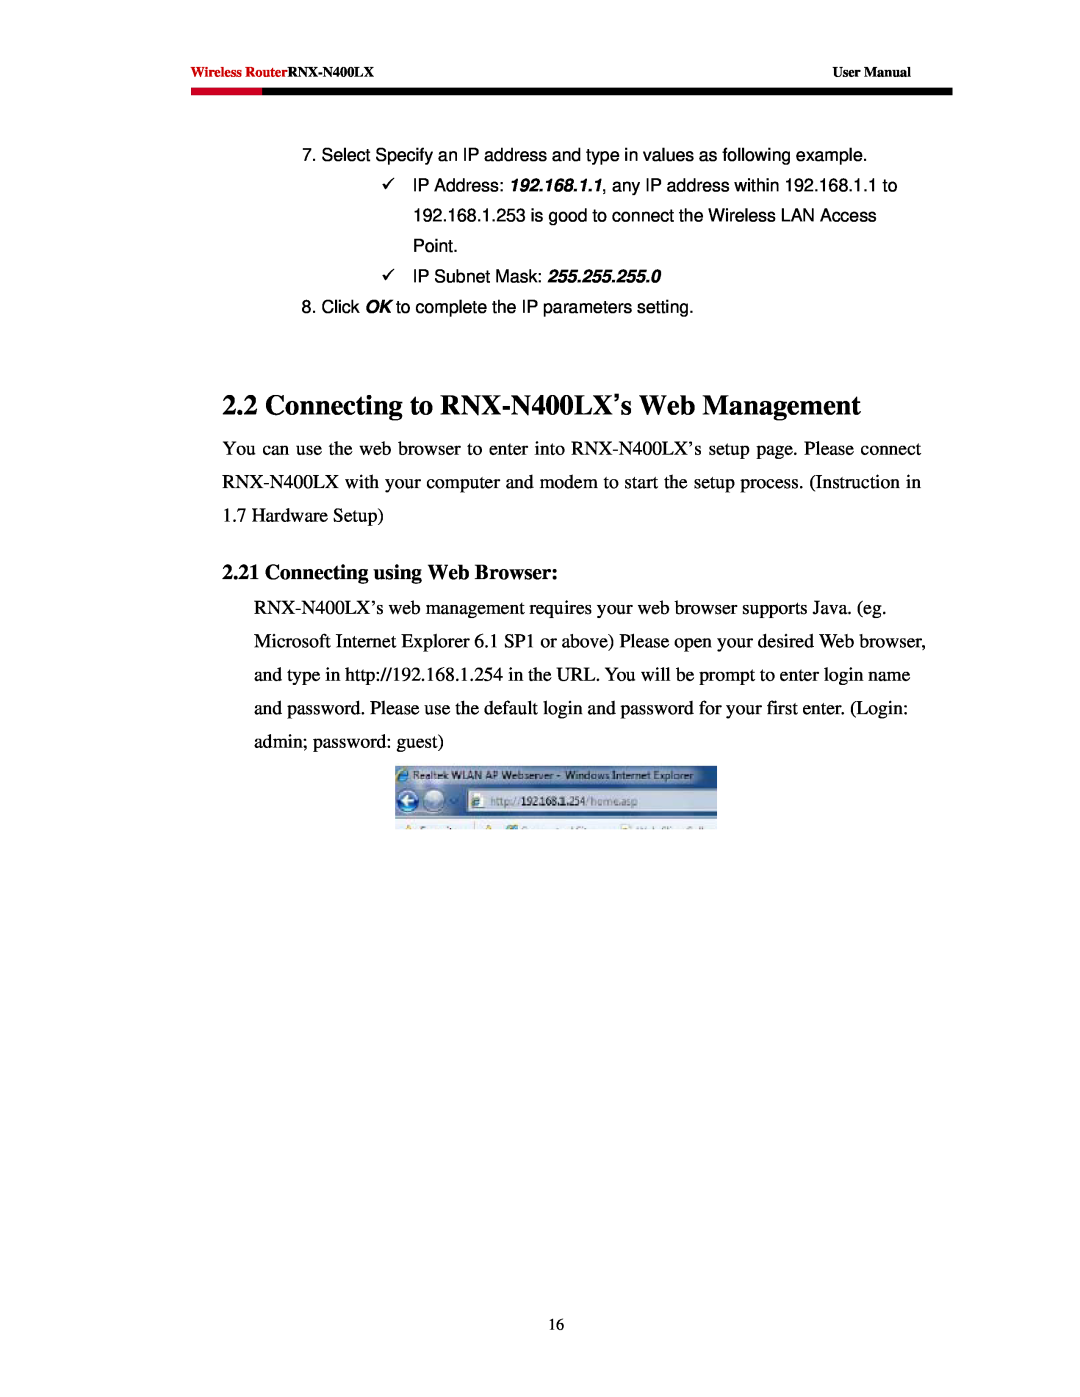 Rosewill user manual Connecting to RNX-N400LX’s Web Management, Connecting using Web Browser 